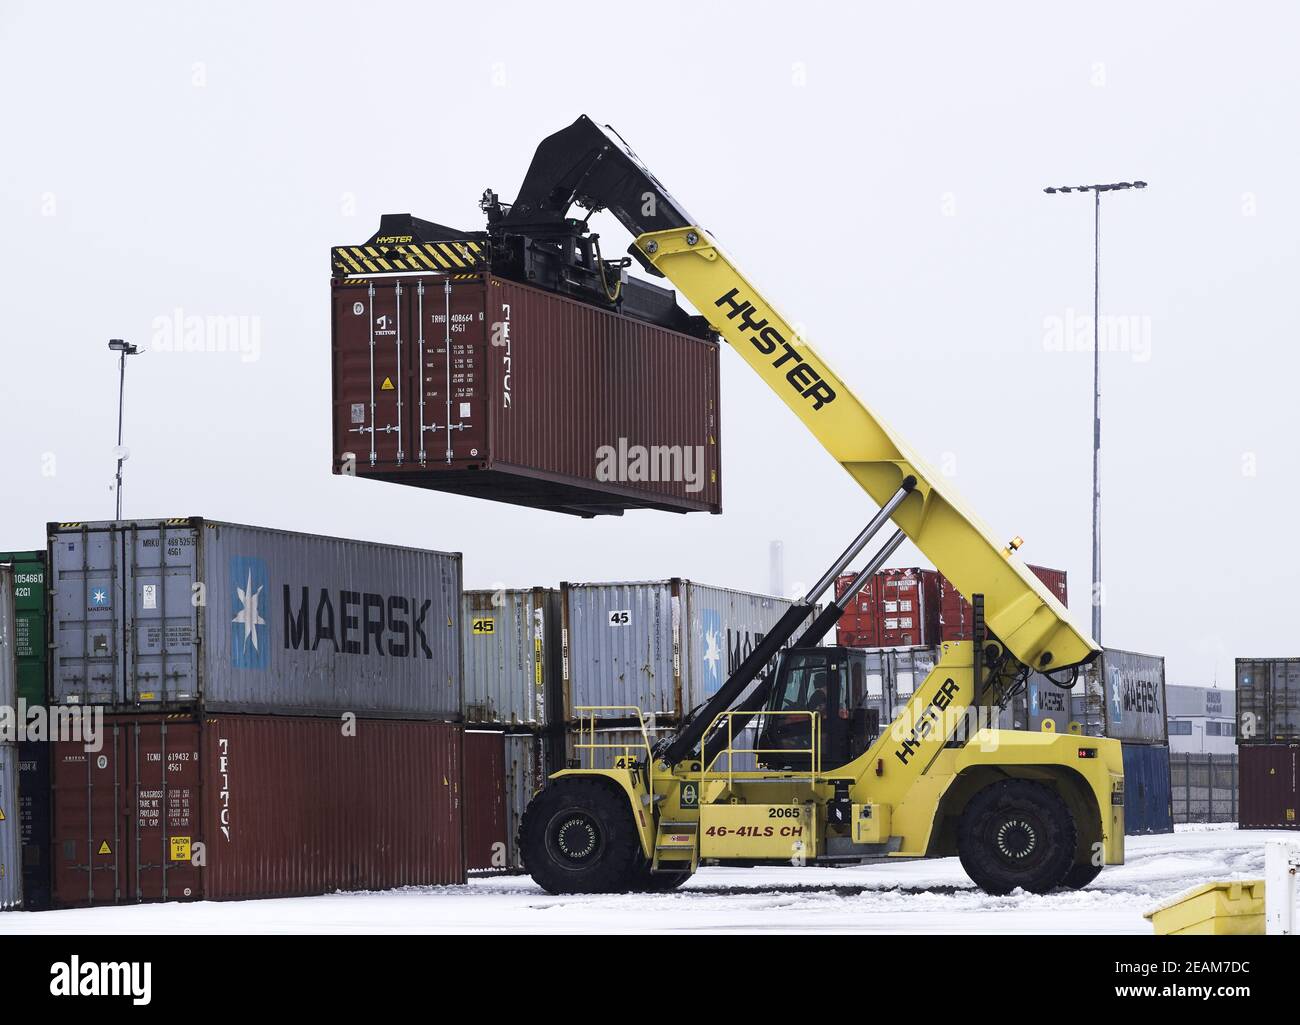 DONCASTER, UK - FEBRUARY 2, 2021.  A heavy lifting machine lifting a cargo box or shipping container in a rail terminal or yard, Stock Photo